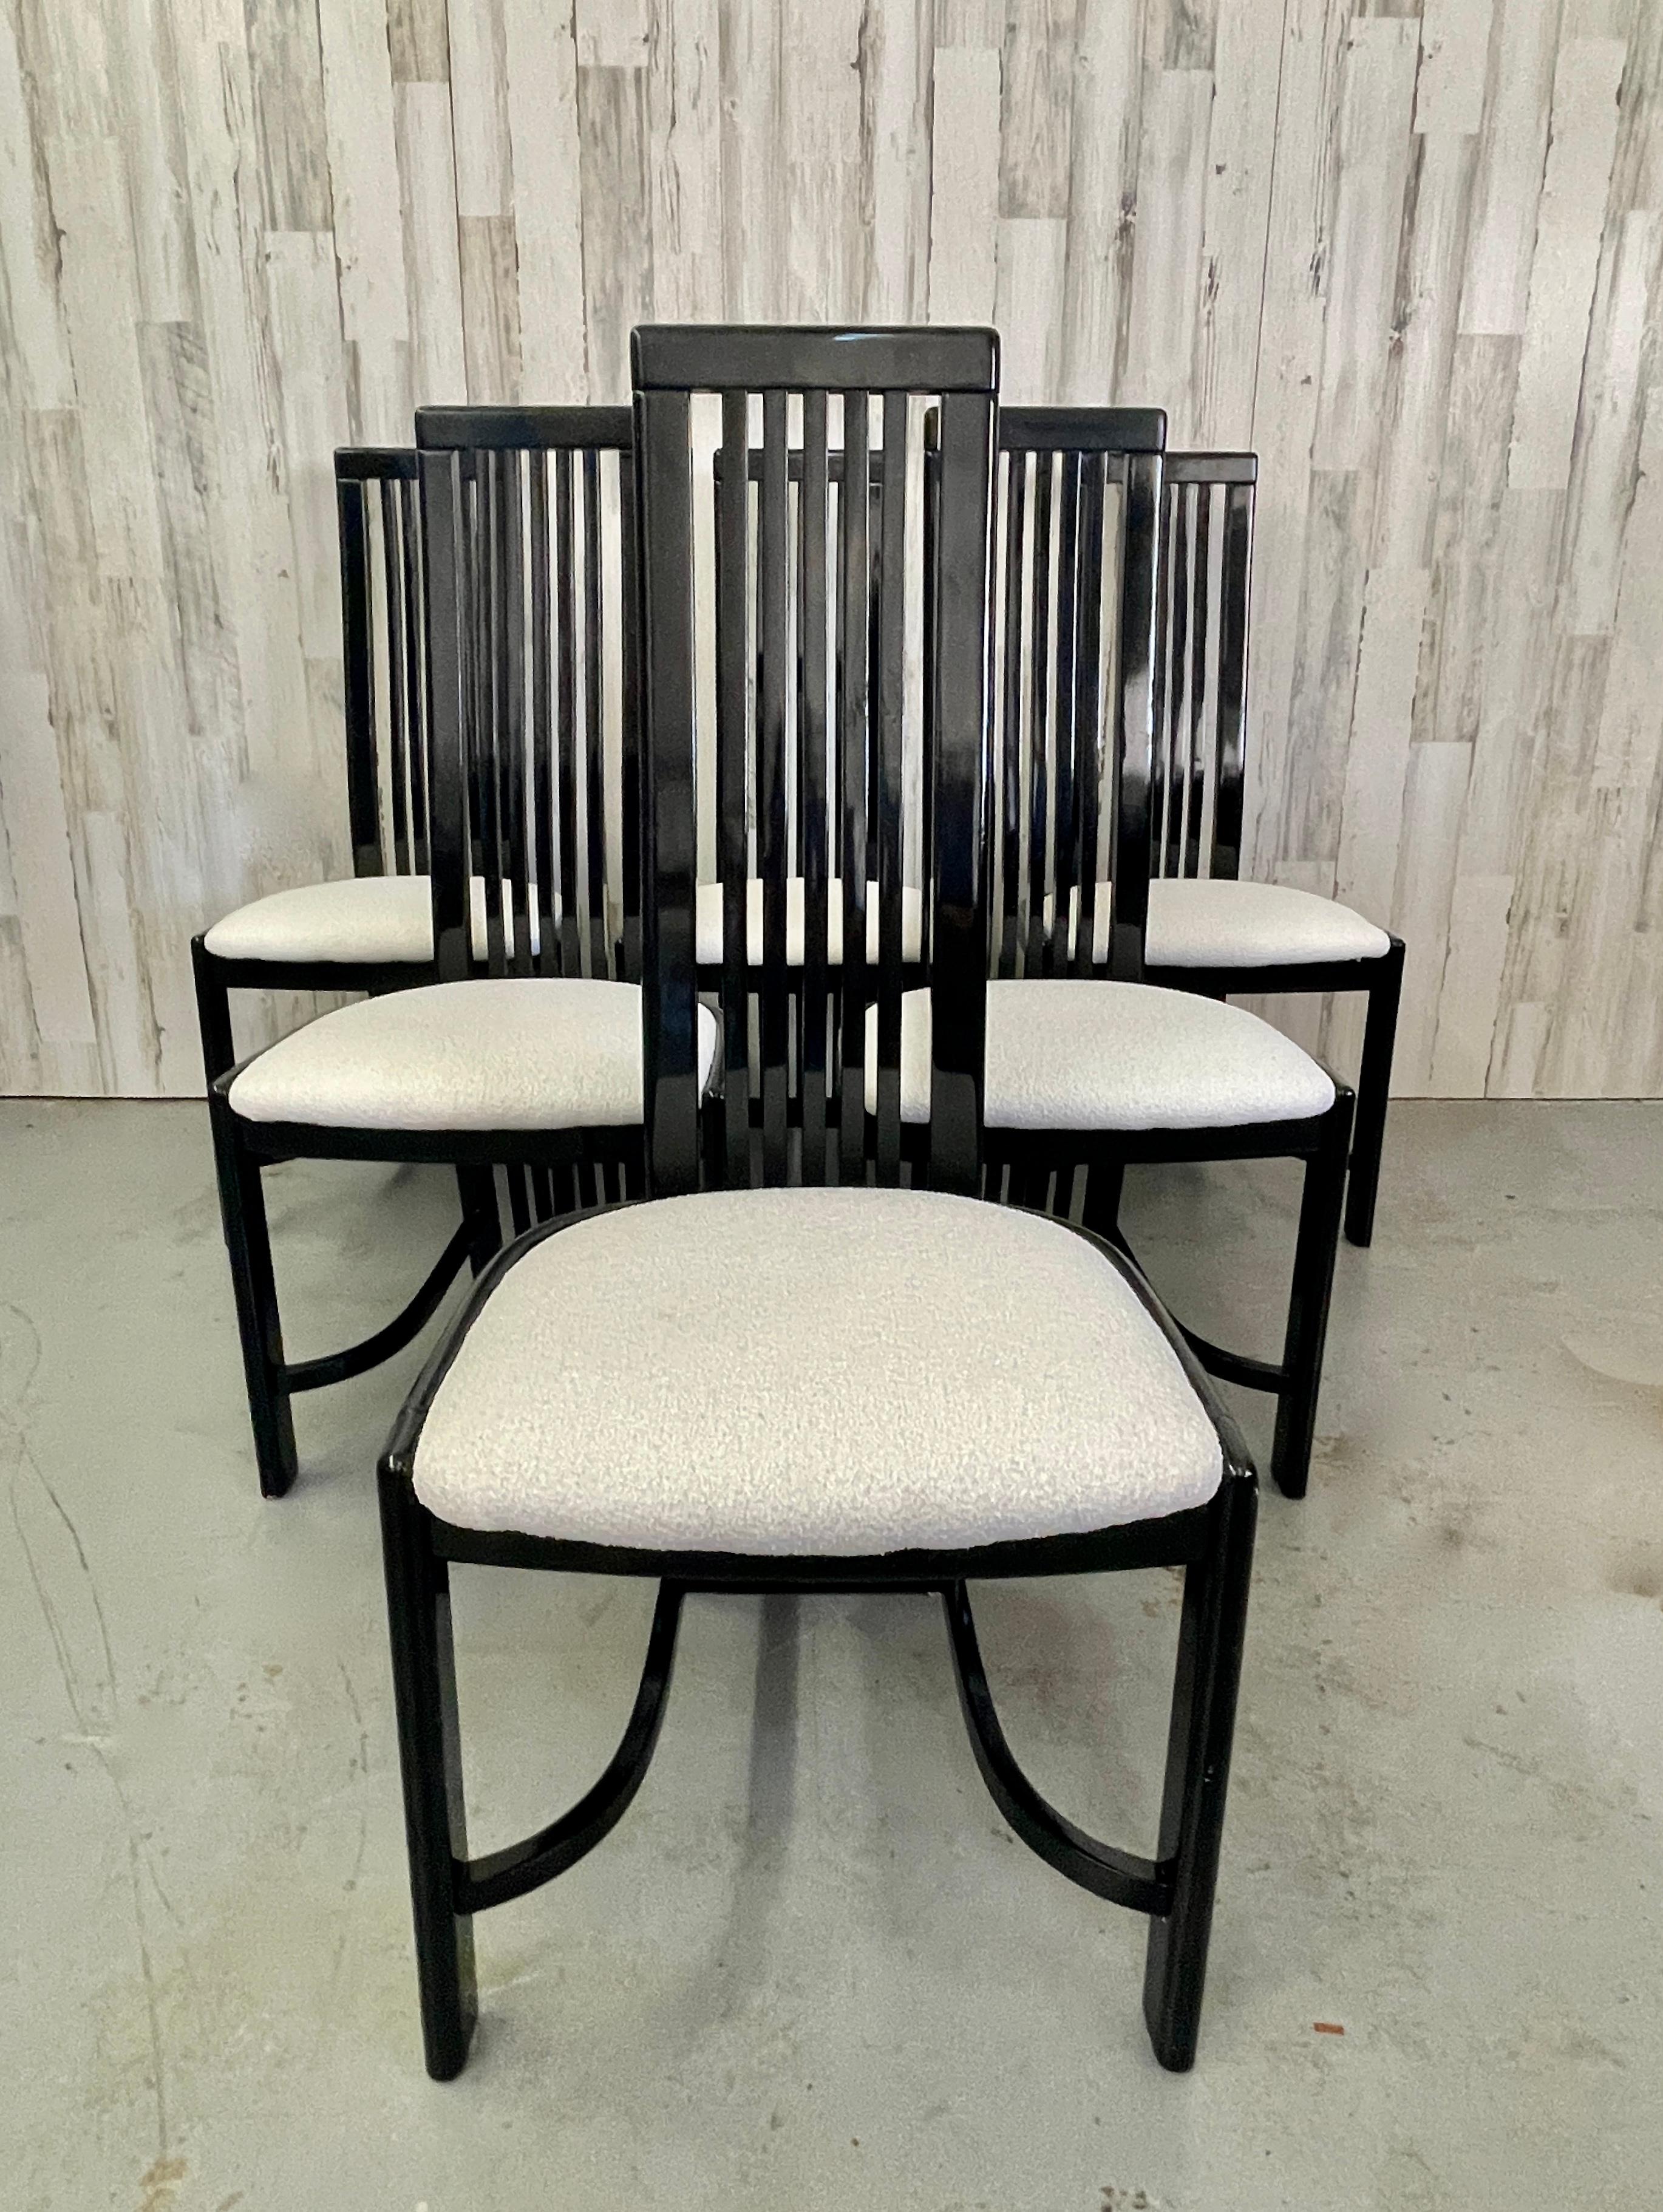 Black Lacquer Italian Liberty Furniture Industries dining chairs. Each chair has a sleek curved back and are recovered in a very nice white boucle fabric.